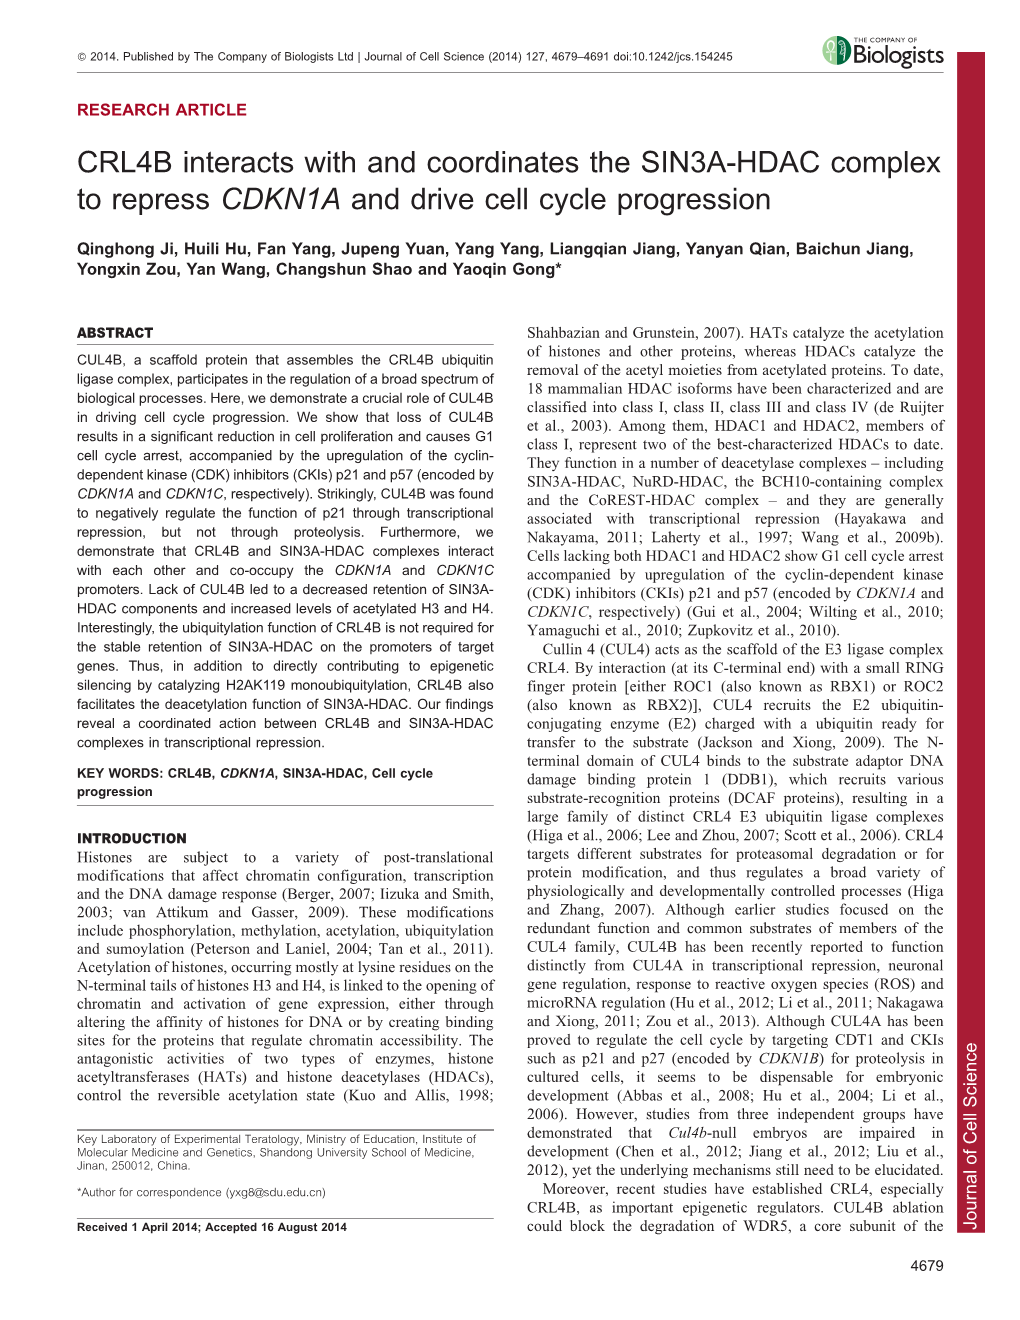 CRL4B Interacts with and Coordinates the SIN3A-HDAC Complex To